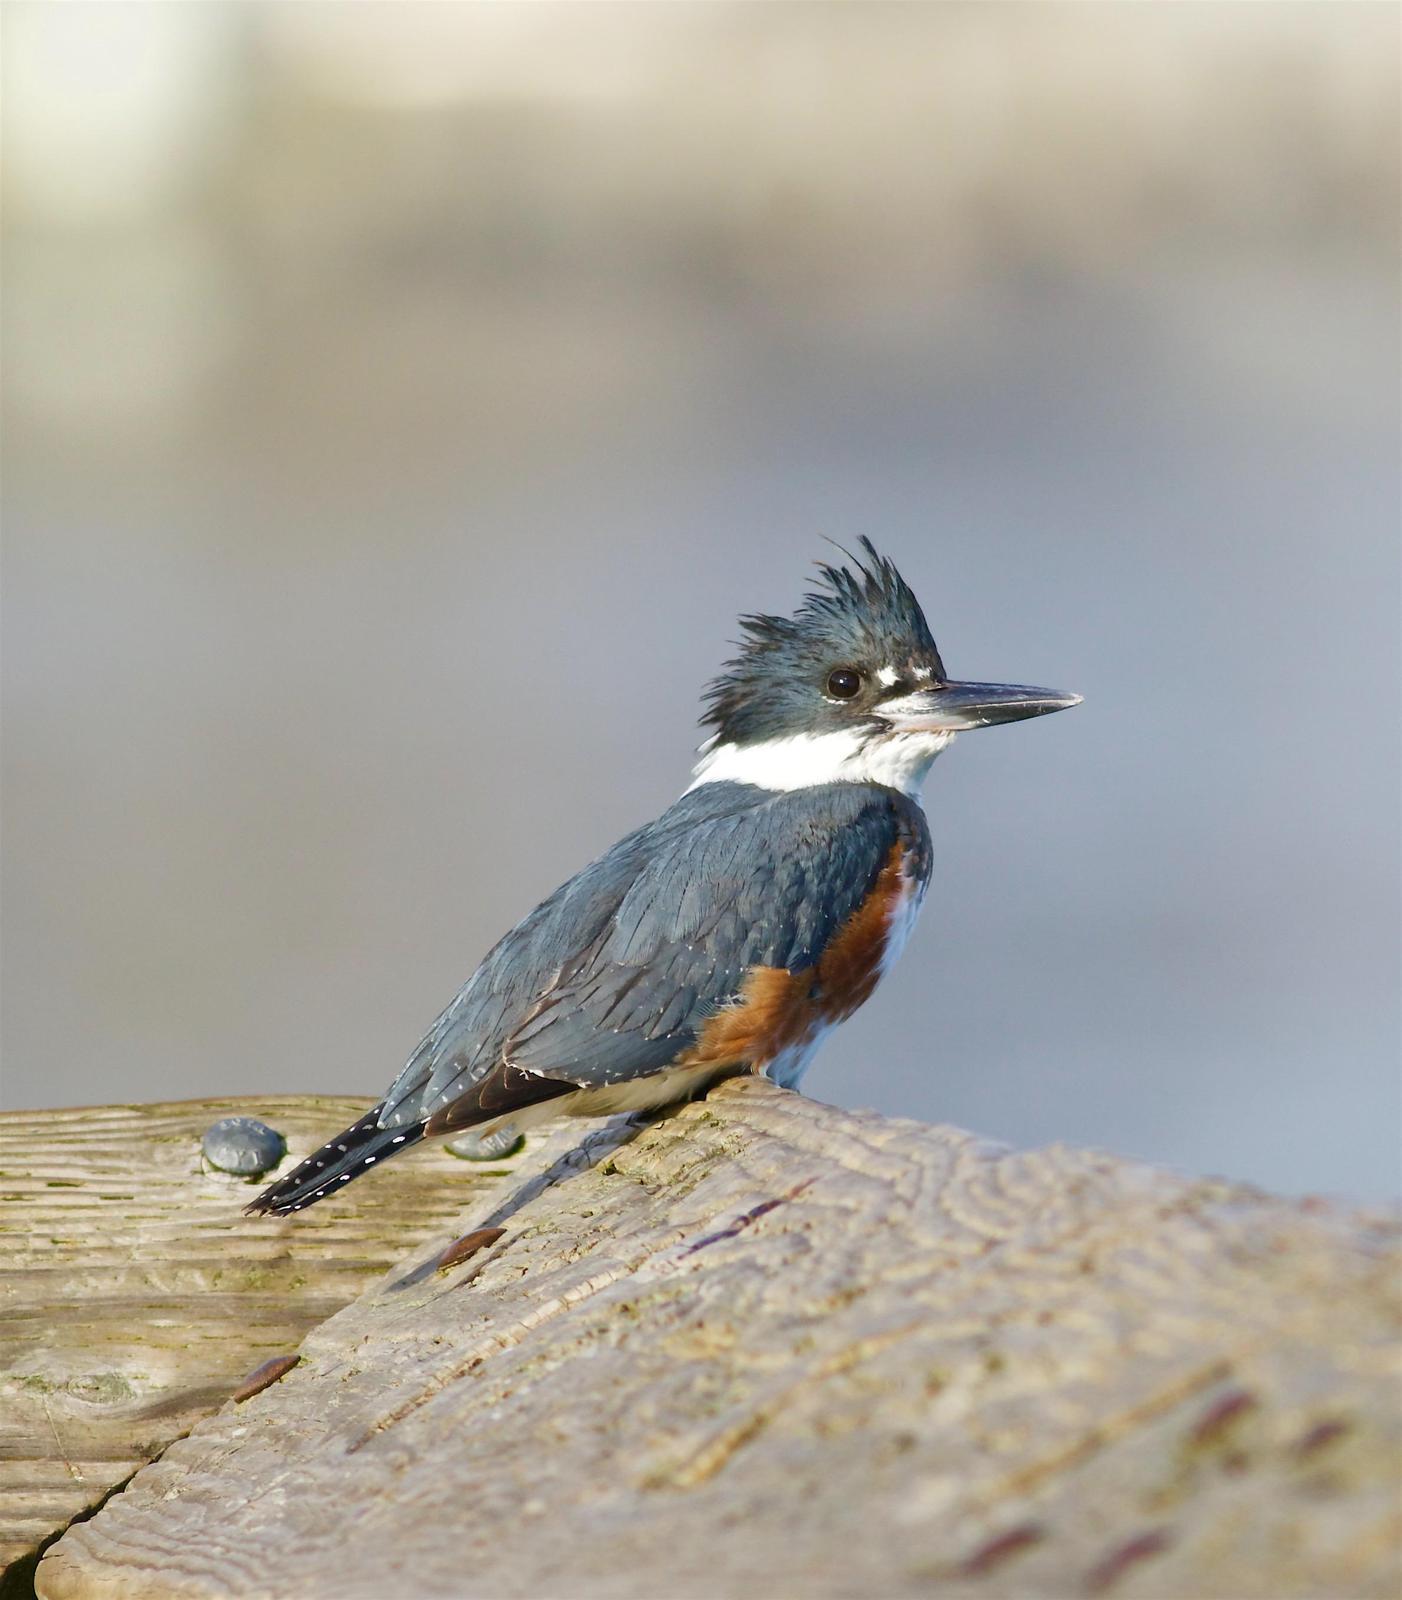 Belted Kingfisher Photo by Kathryn Keith